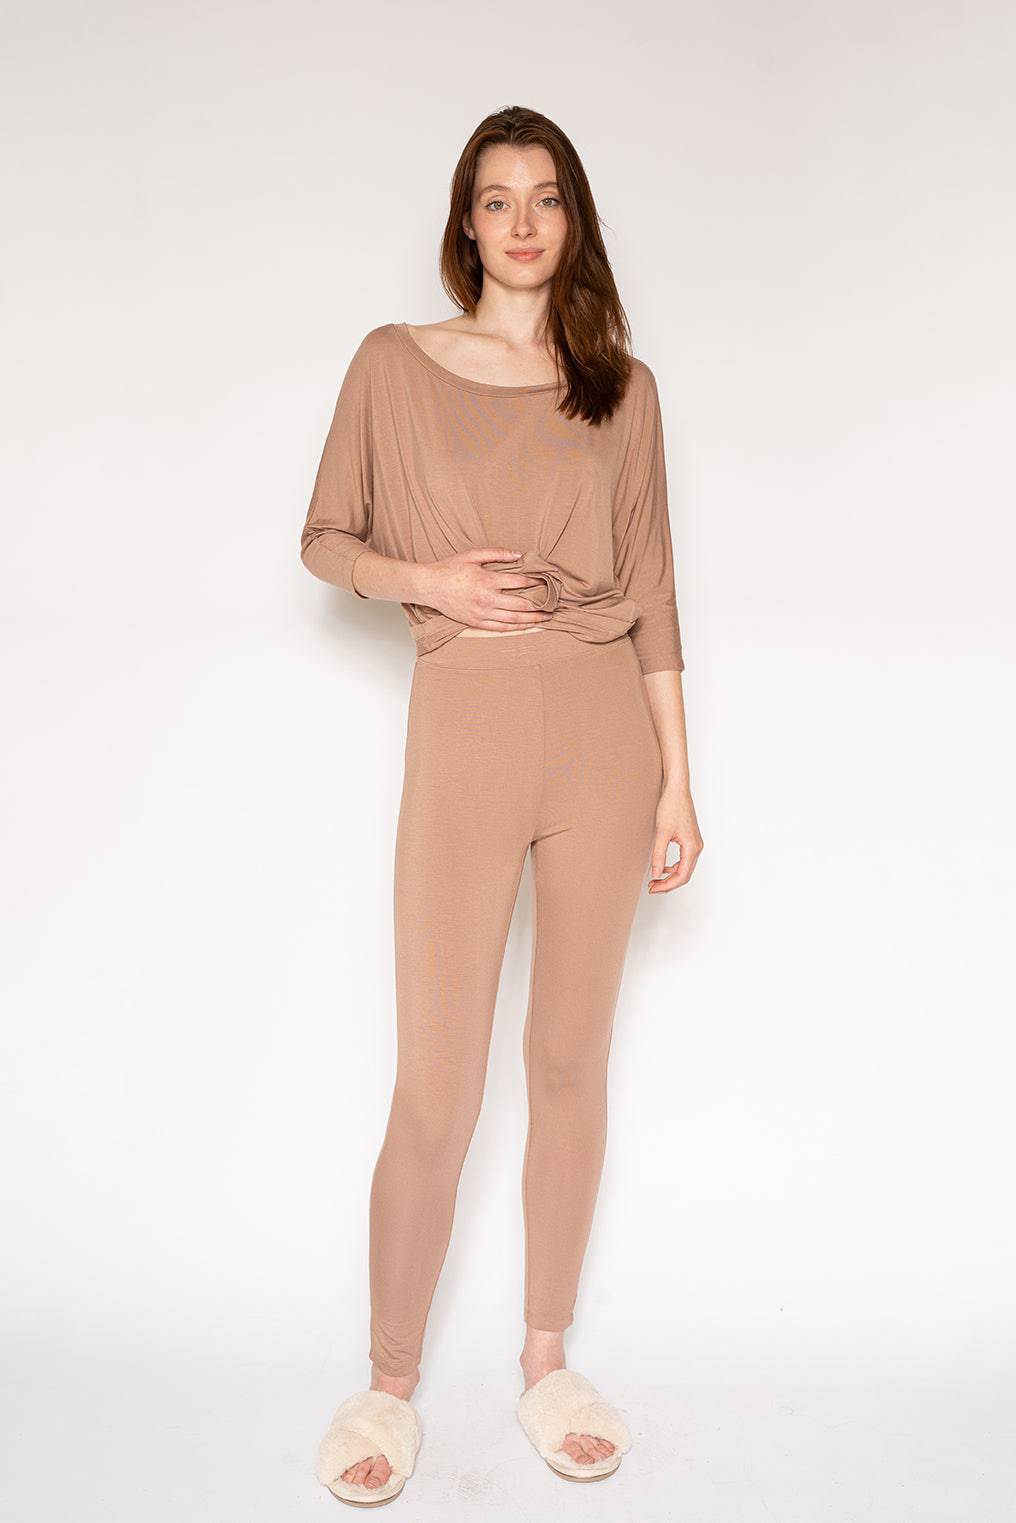 Essential Lounge Pant - Ginger Snap - LATTELOVE Co.